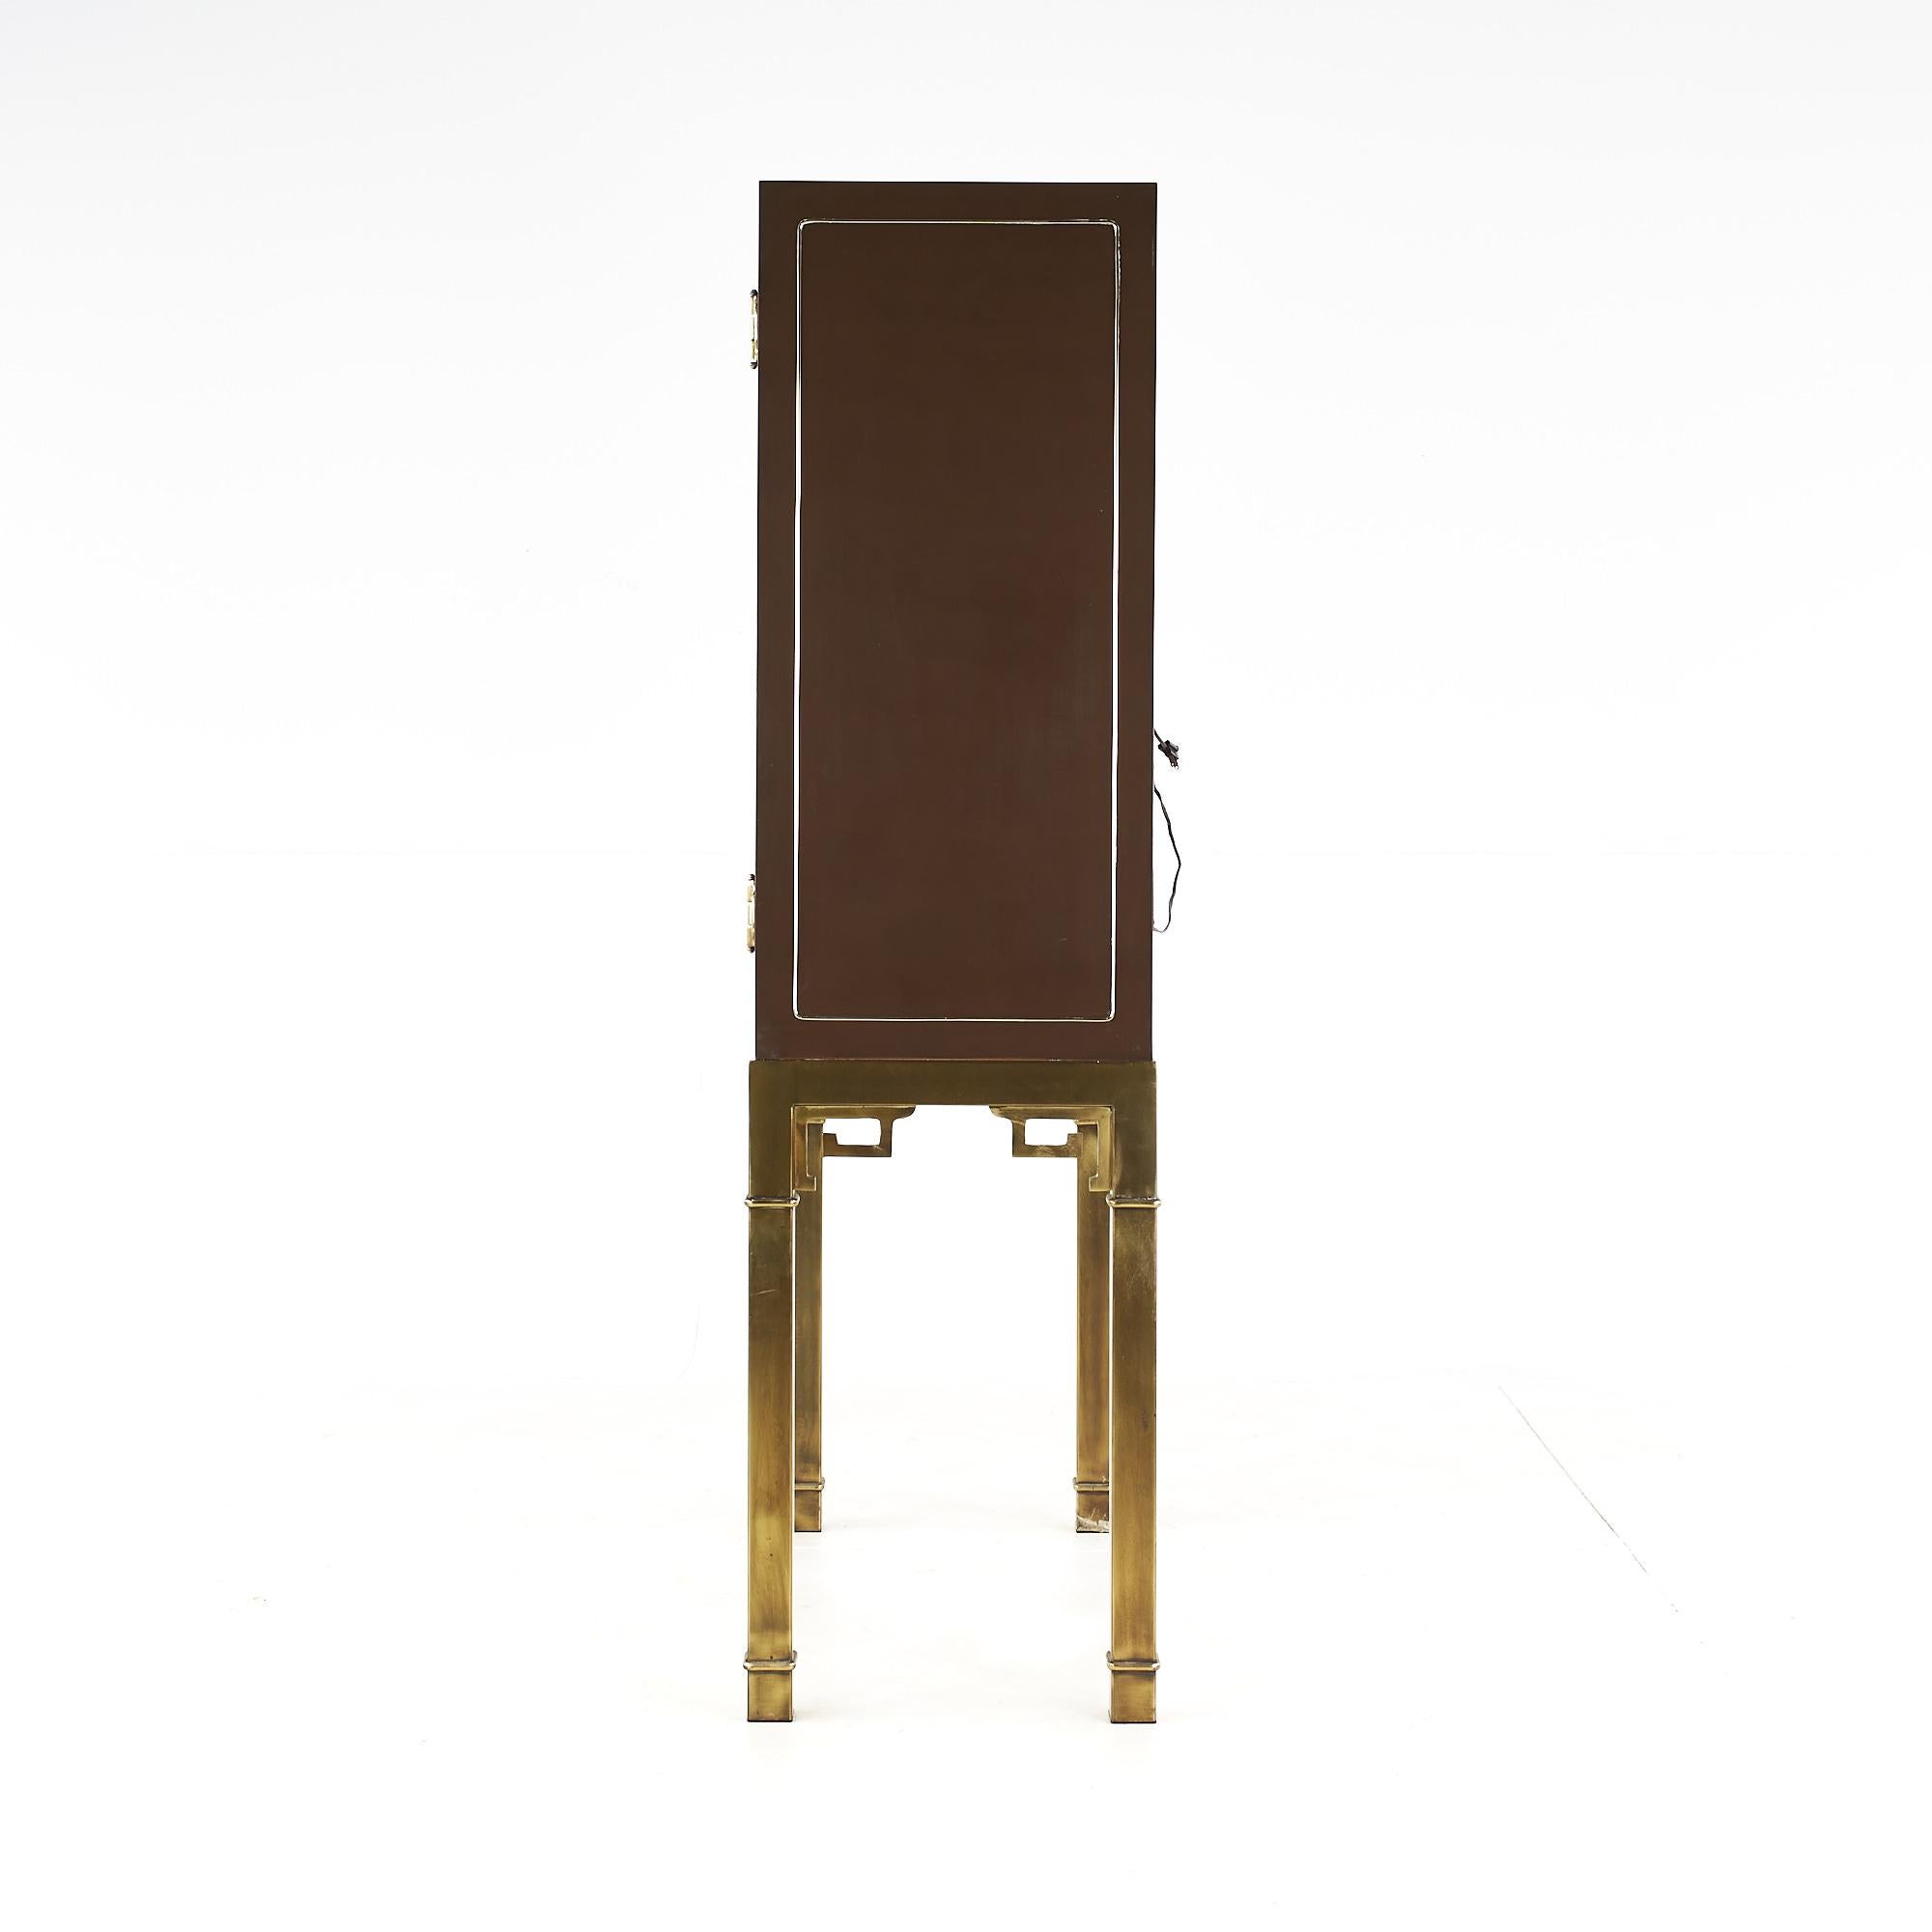 Mastercraft Mid Century Asian Inspired Lacquered Bar Cabinet on Brass Stand Bon état - En vente à Countryside, IL